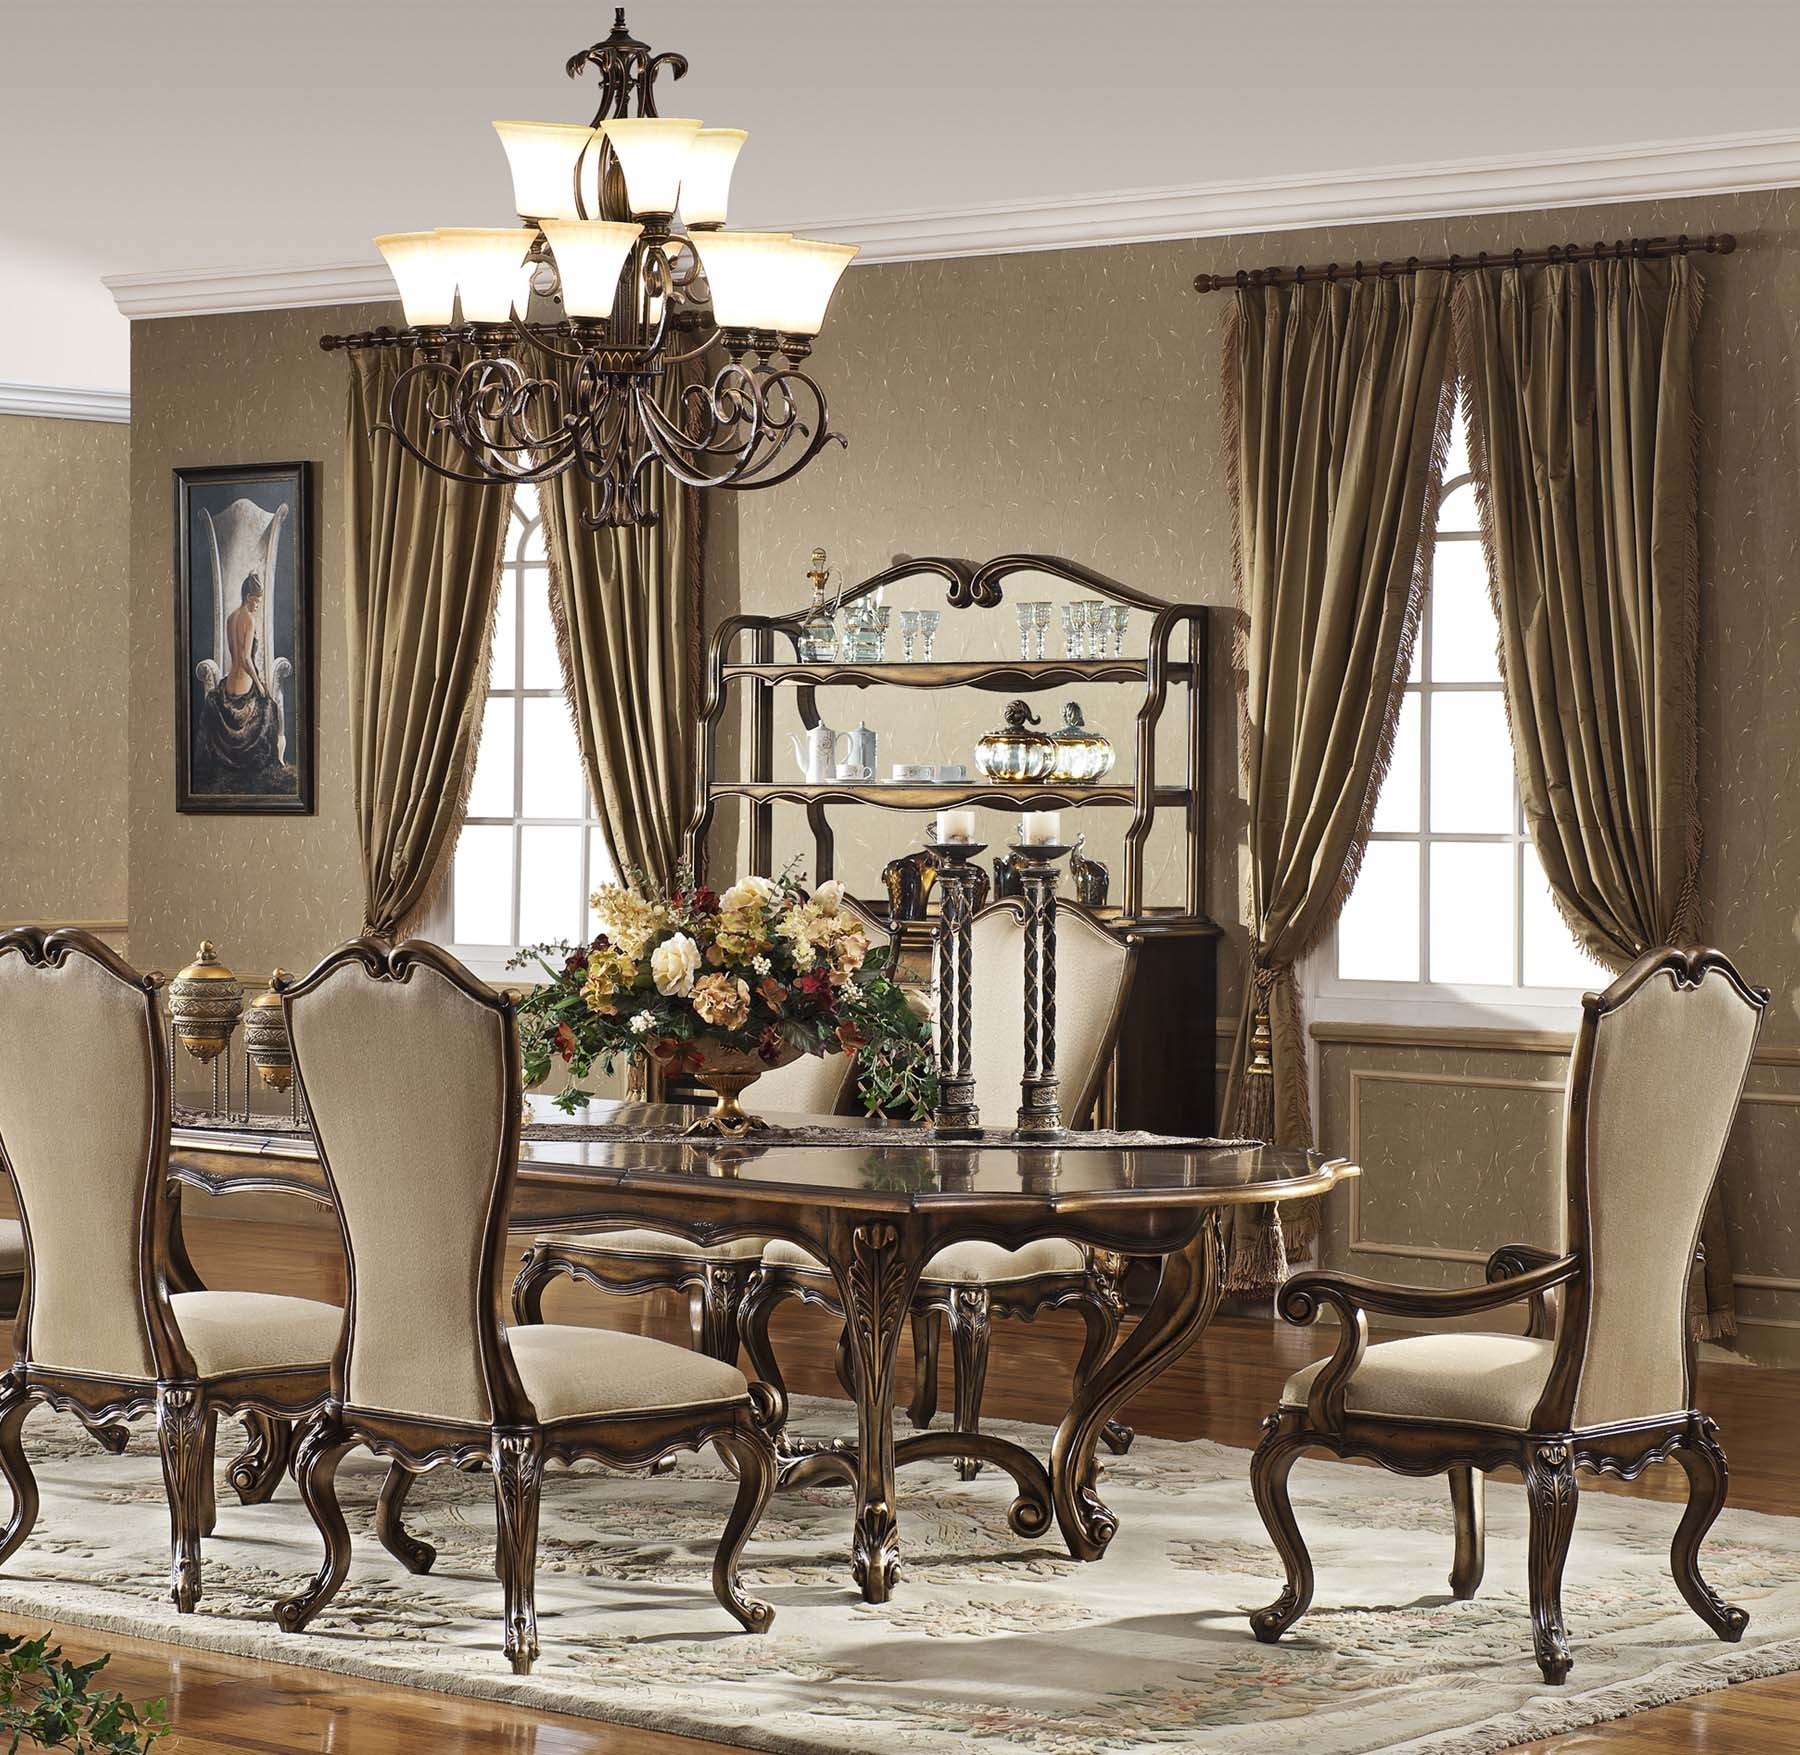 Oxford Dining Table shown in Parisian Bronze finish